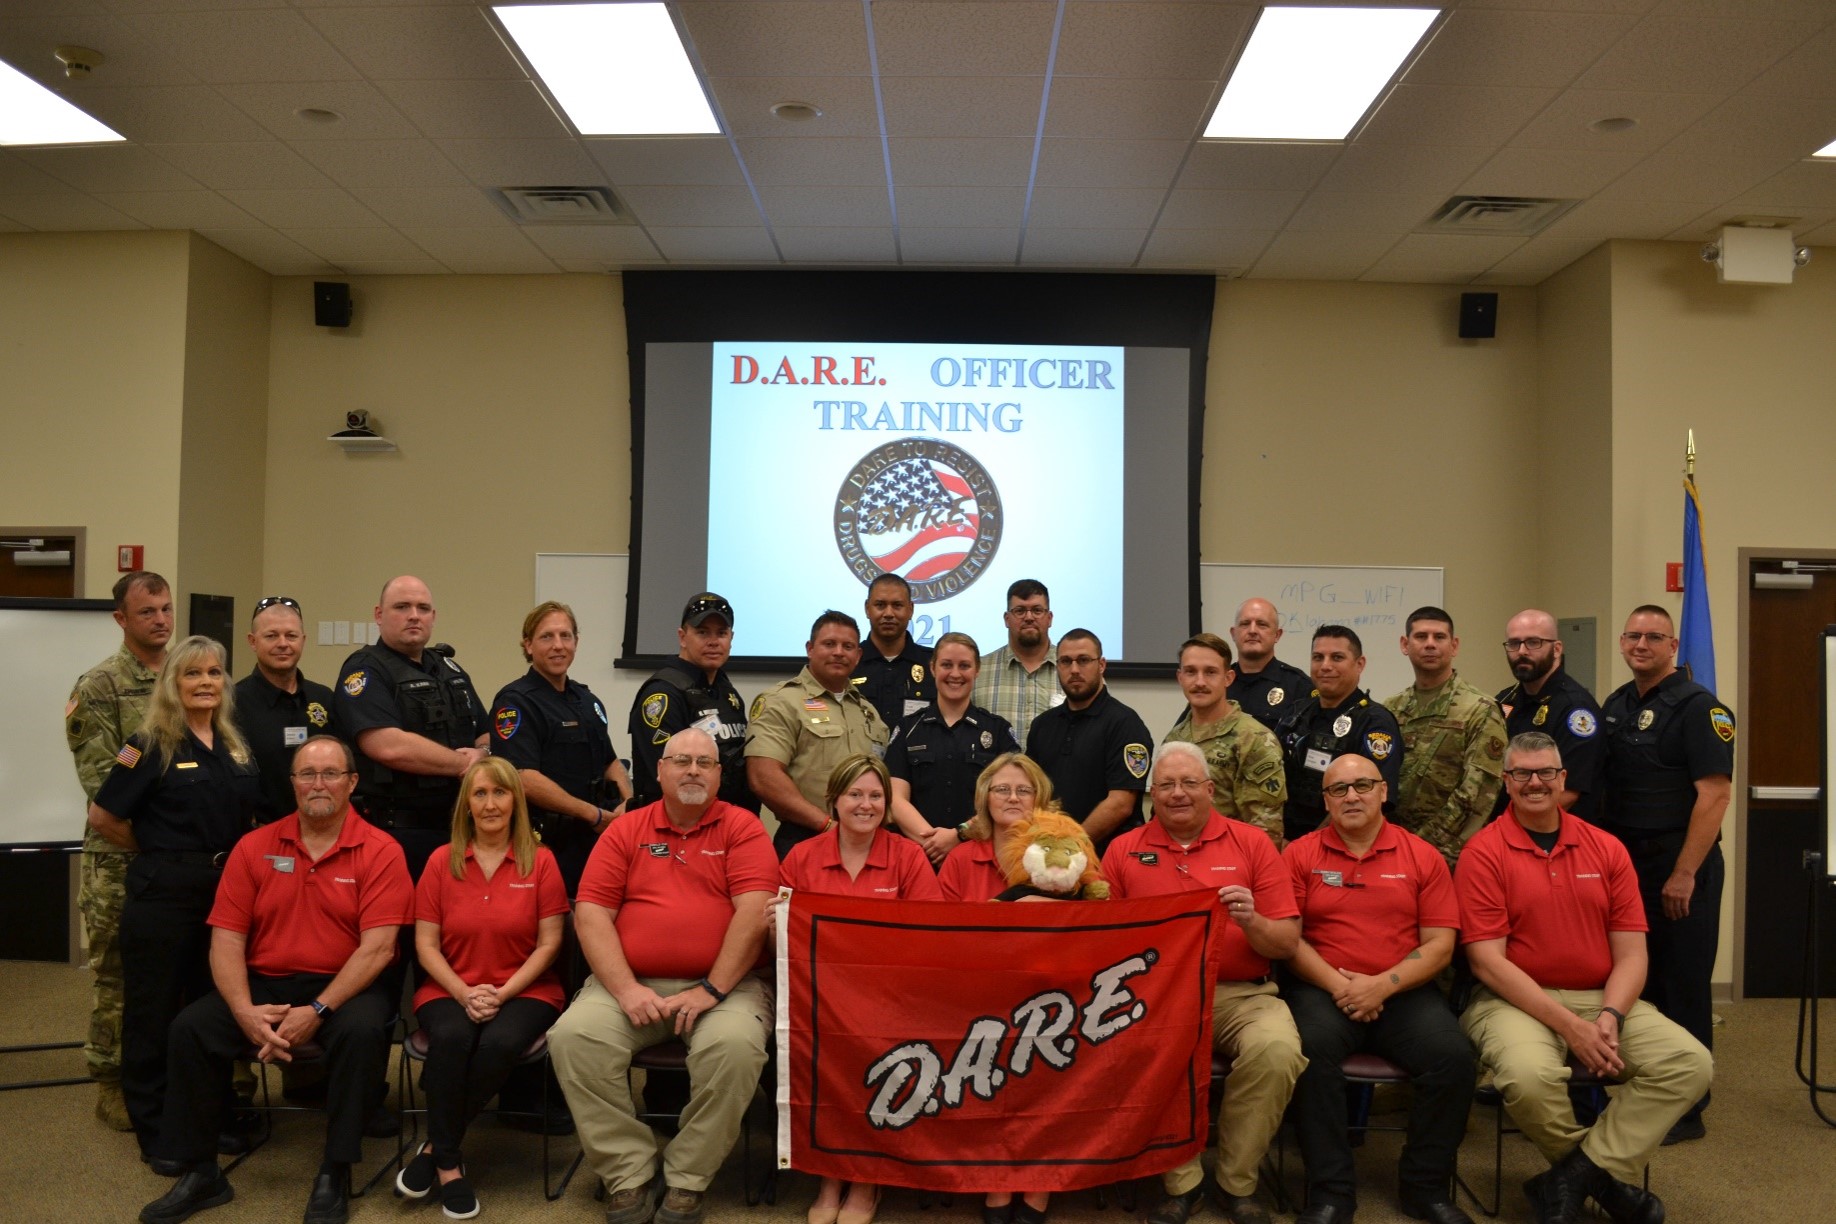 Class Photo from the D.A.R.E. Officer Training held on June 14 – 28, 2021 in Oklahoma City